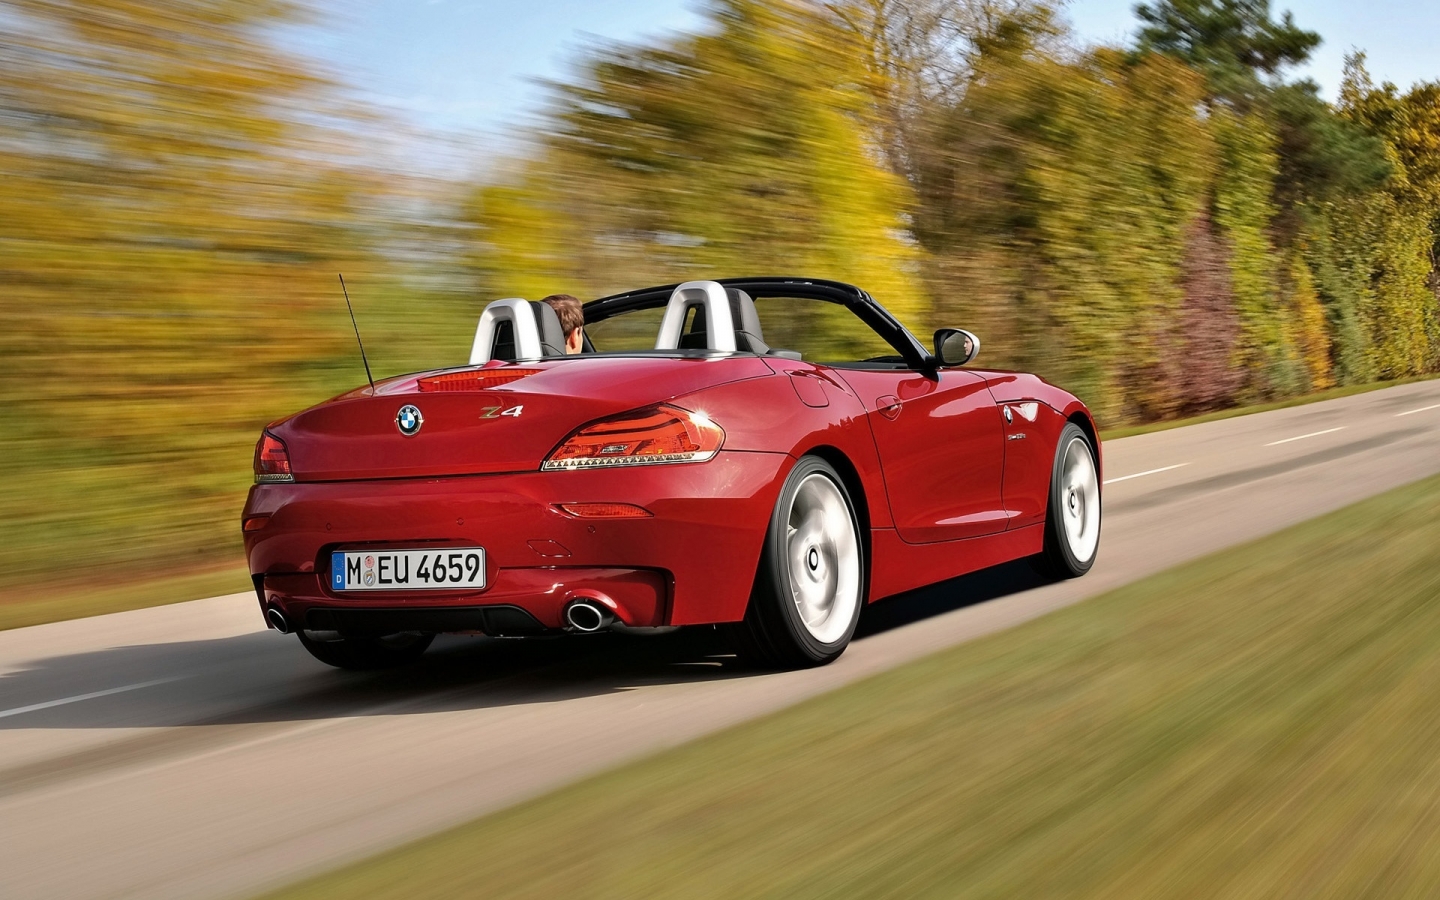 BMW Z4 sDrive35is Rear 2010 for 1440 x 900 widescreen resolution